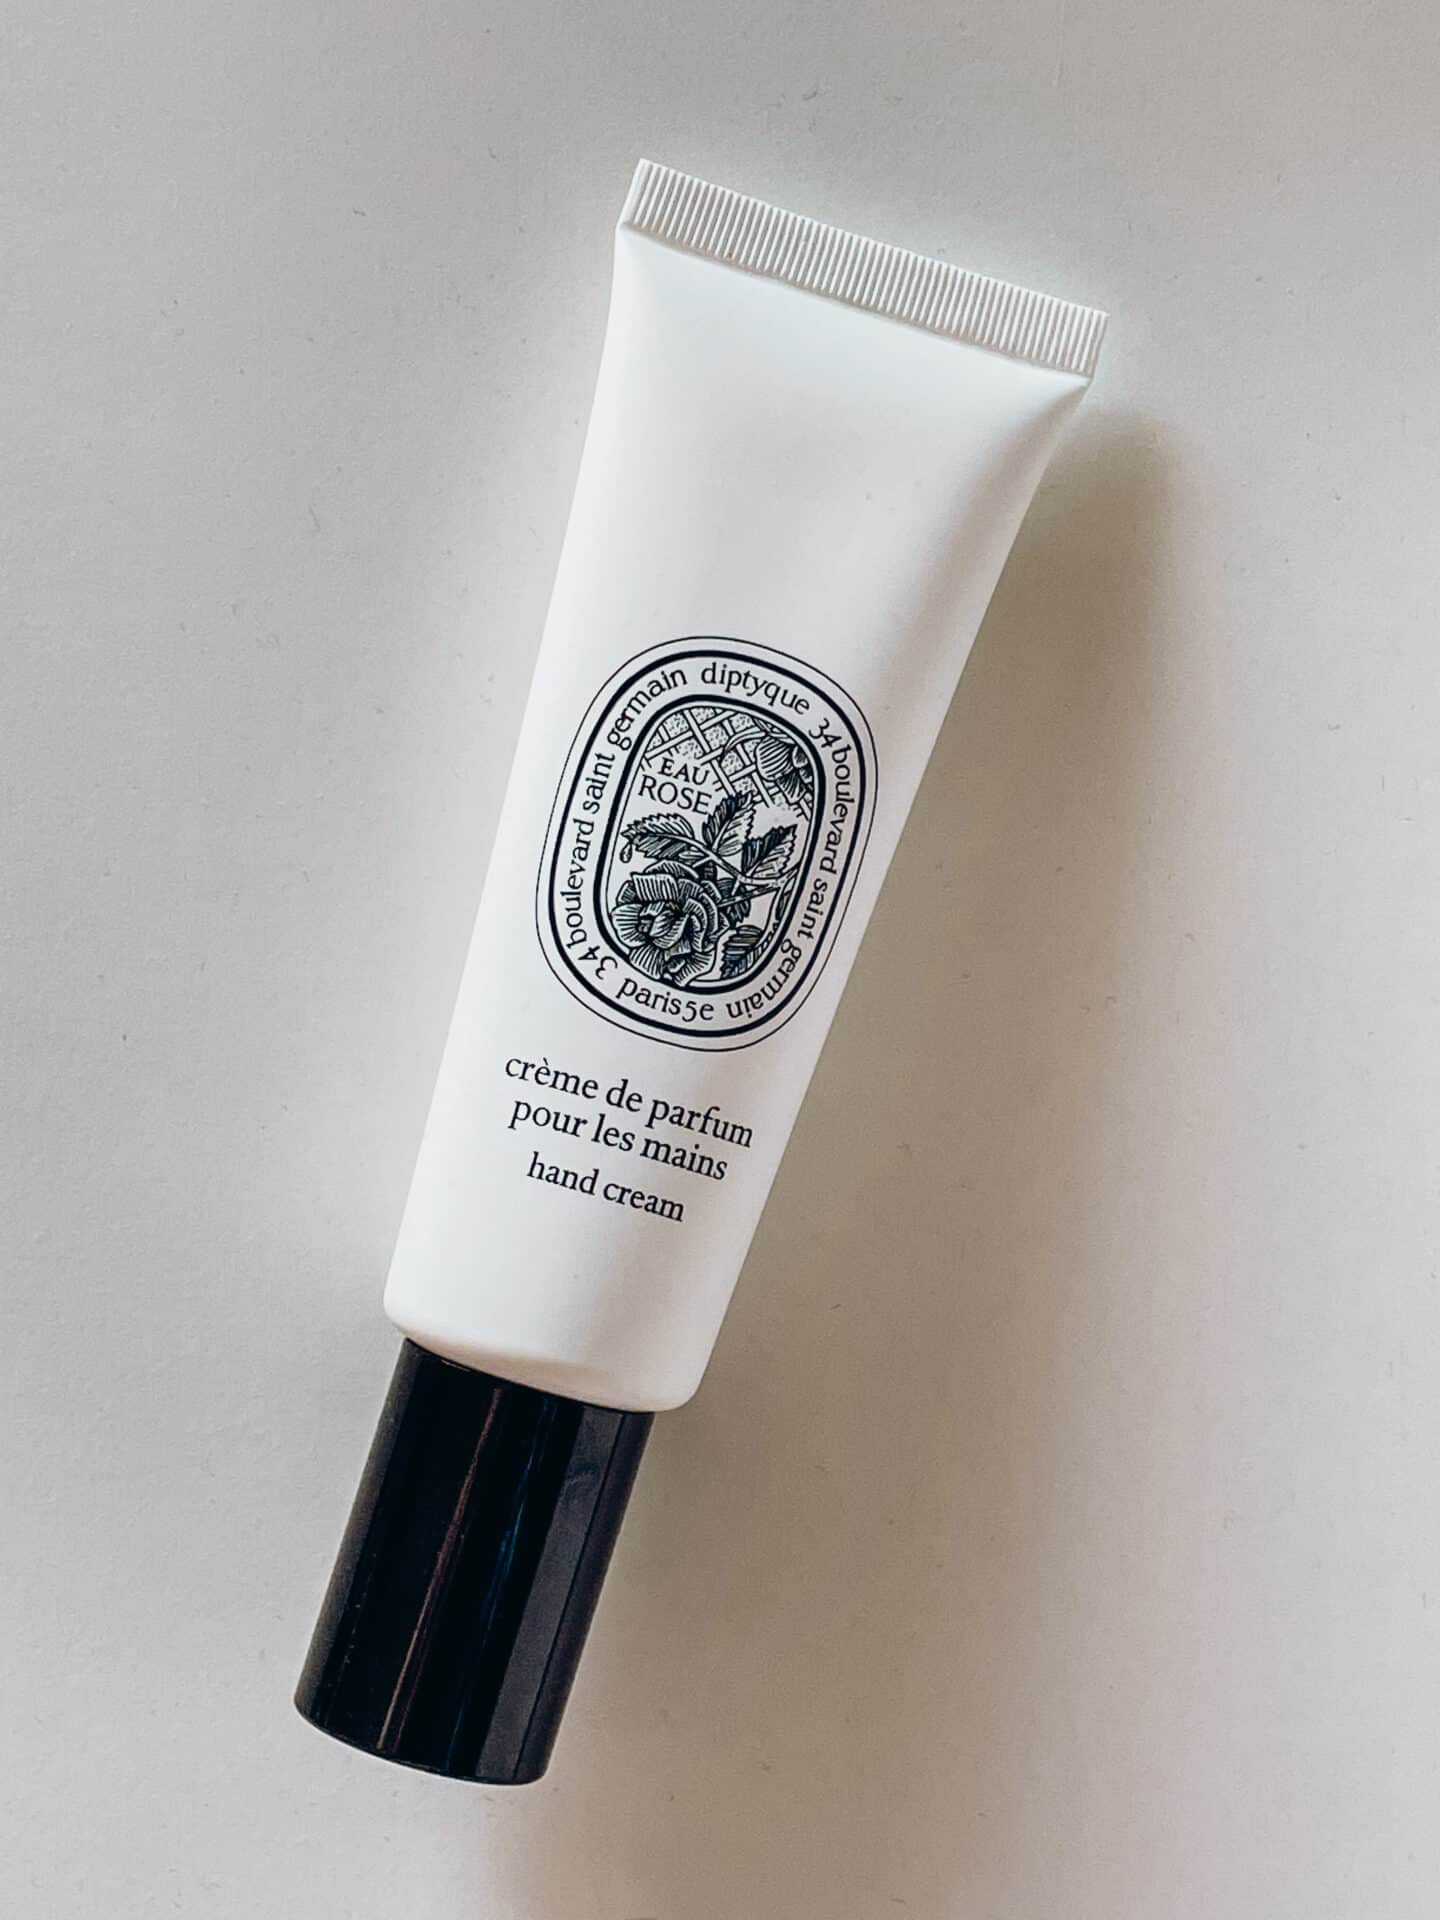 Diptyque Eau Rose Hand Emulsion: Luxury or Overpriced Hype?